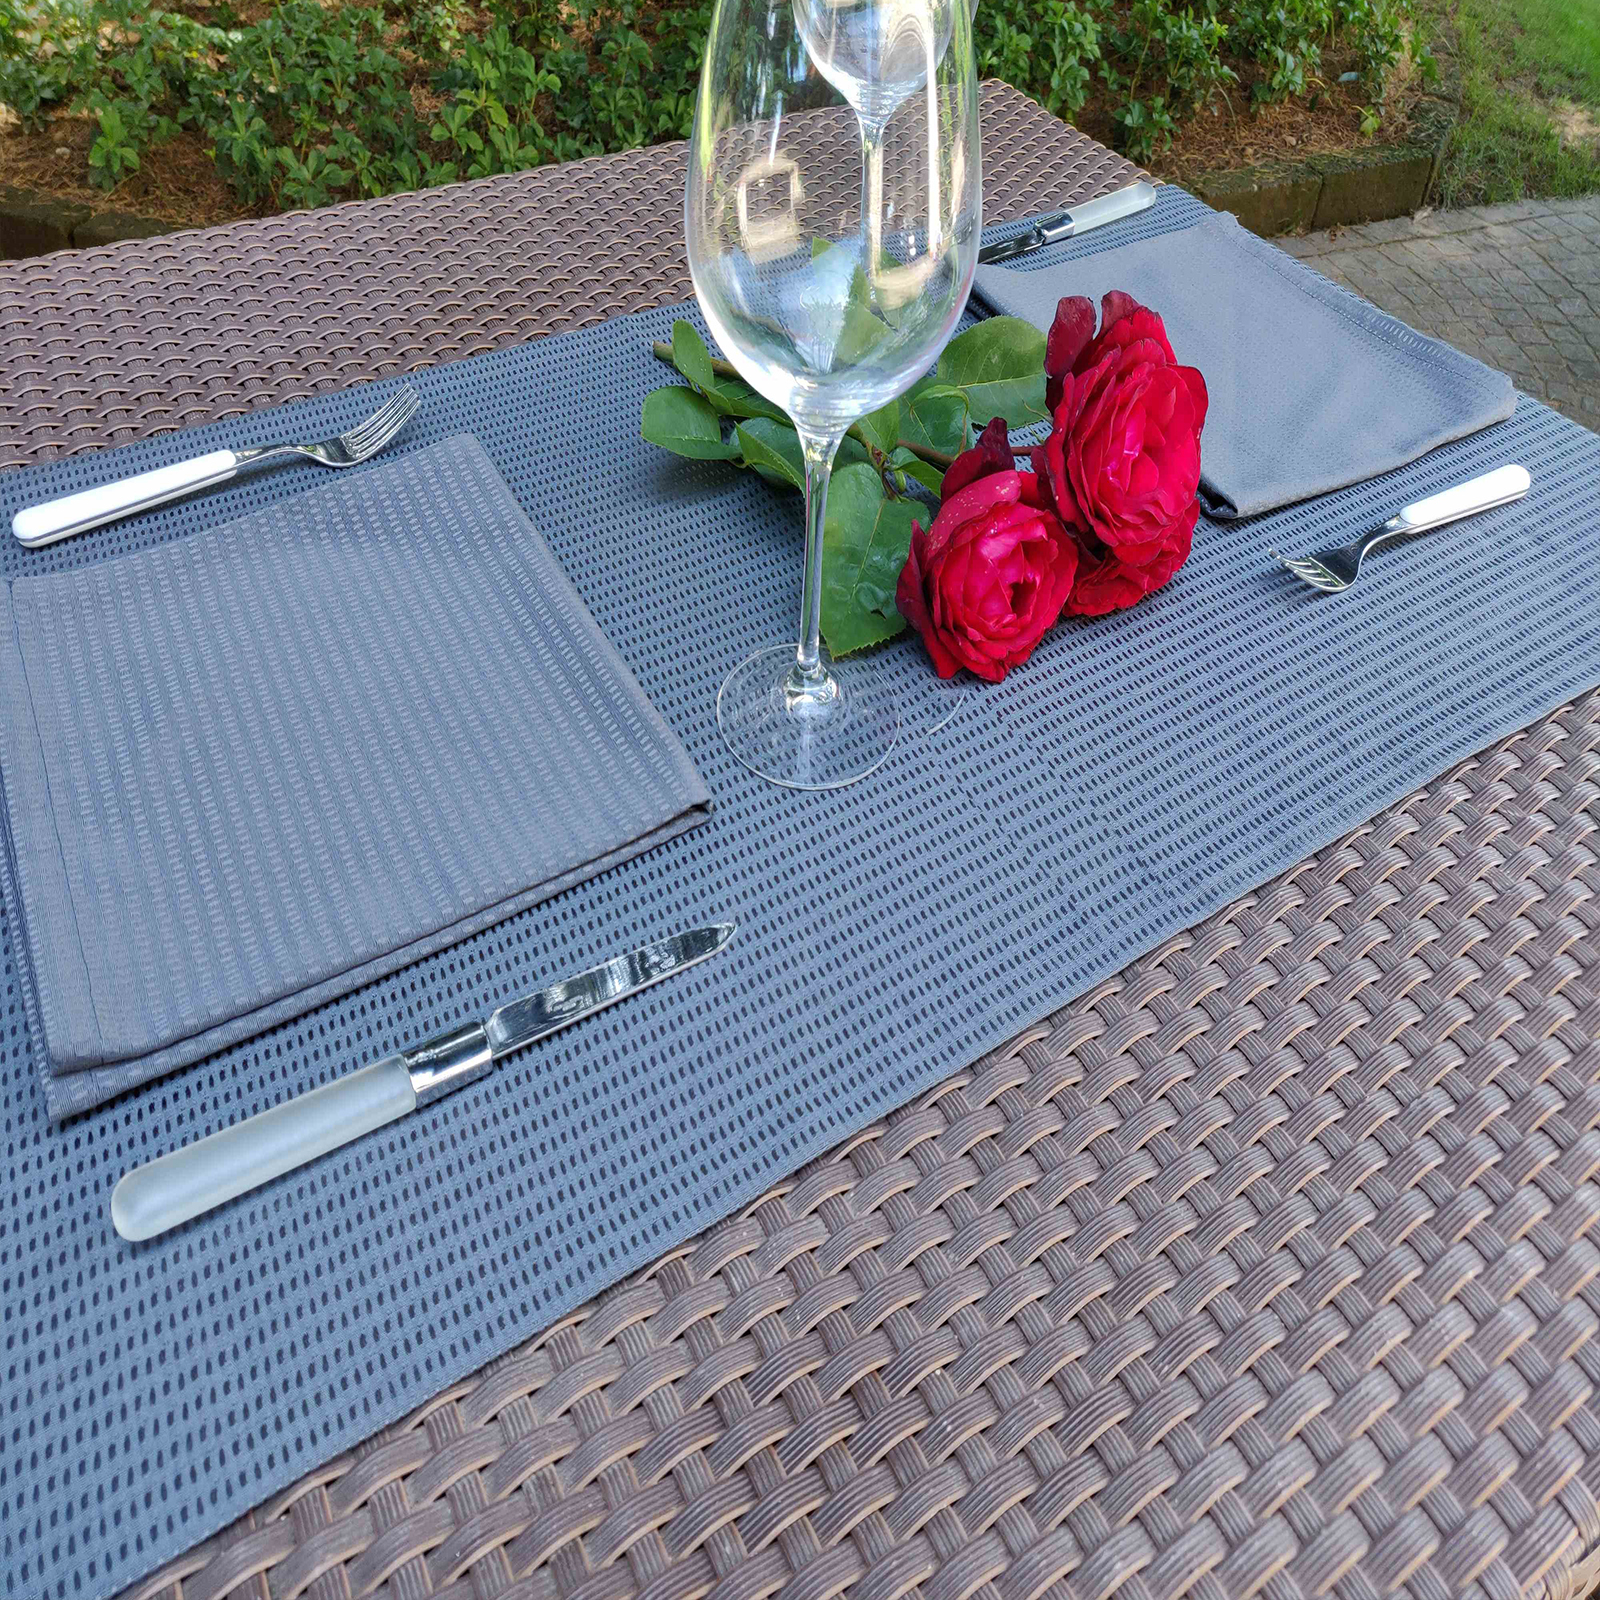 Tablecloth fabric, with anti-stain treatment Made in Italy<br /> 100% Made in Italy fabric. Style modern with fancy, flowers and Tone on tone decorations.

 Treatments: antibacterial, indanthrene and stain-resistant. Type of workings: jacquard. 